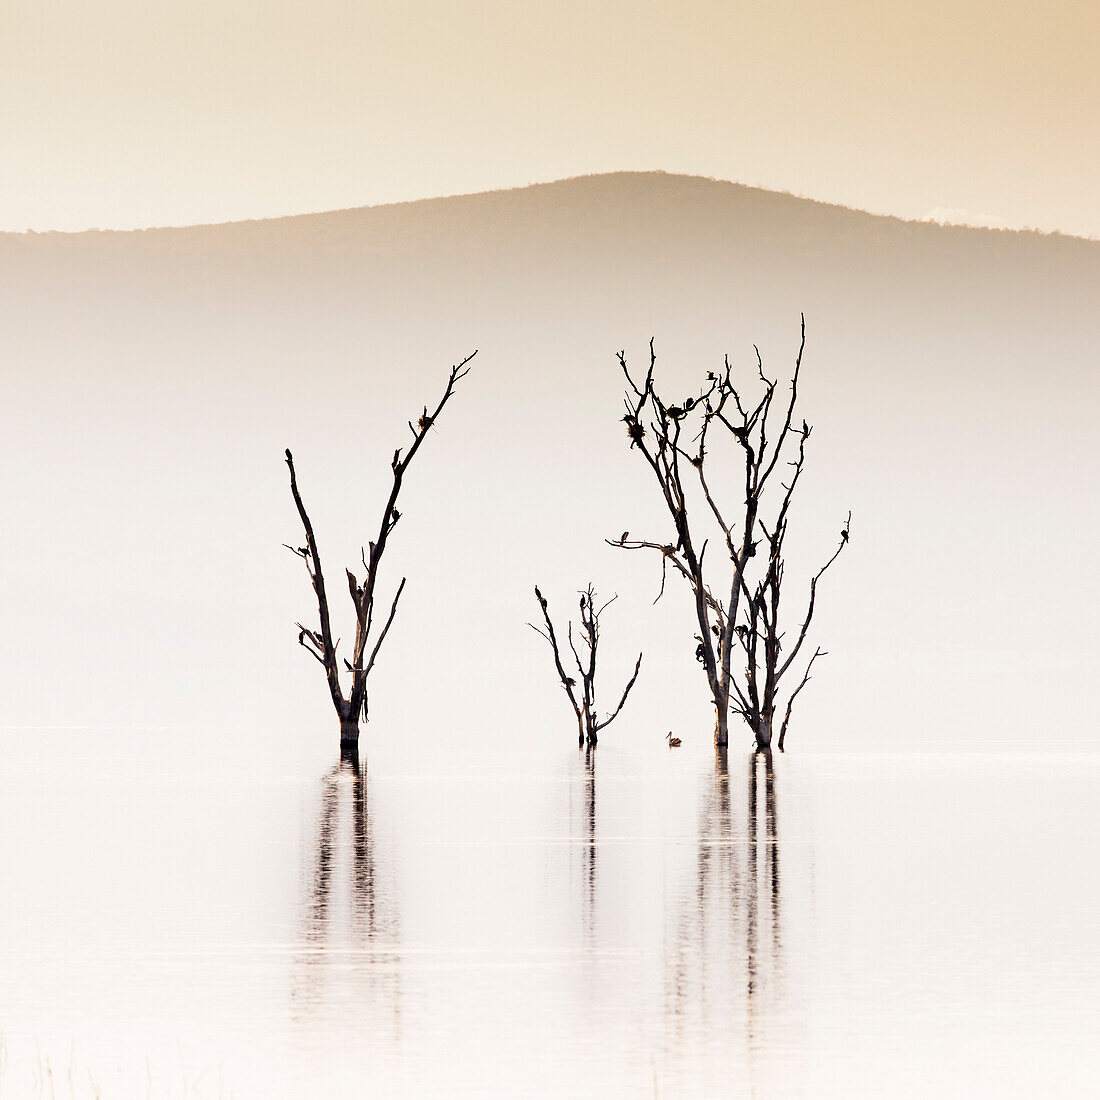 Lake Nakuru, Kenya, at sunrise. The flooded trees pattern, due to the rising of the alcaline waters of the lake in 2014, has been quickly colonized by aquatic birds.